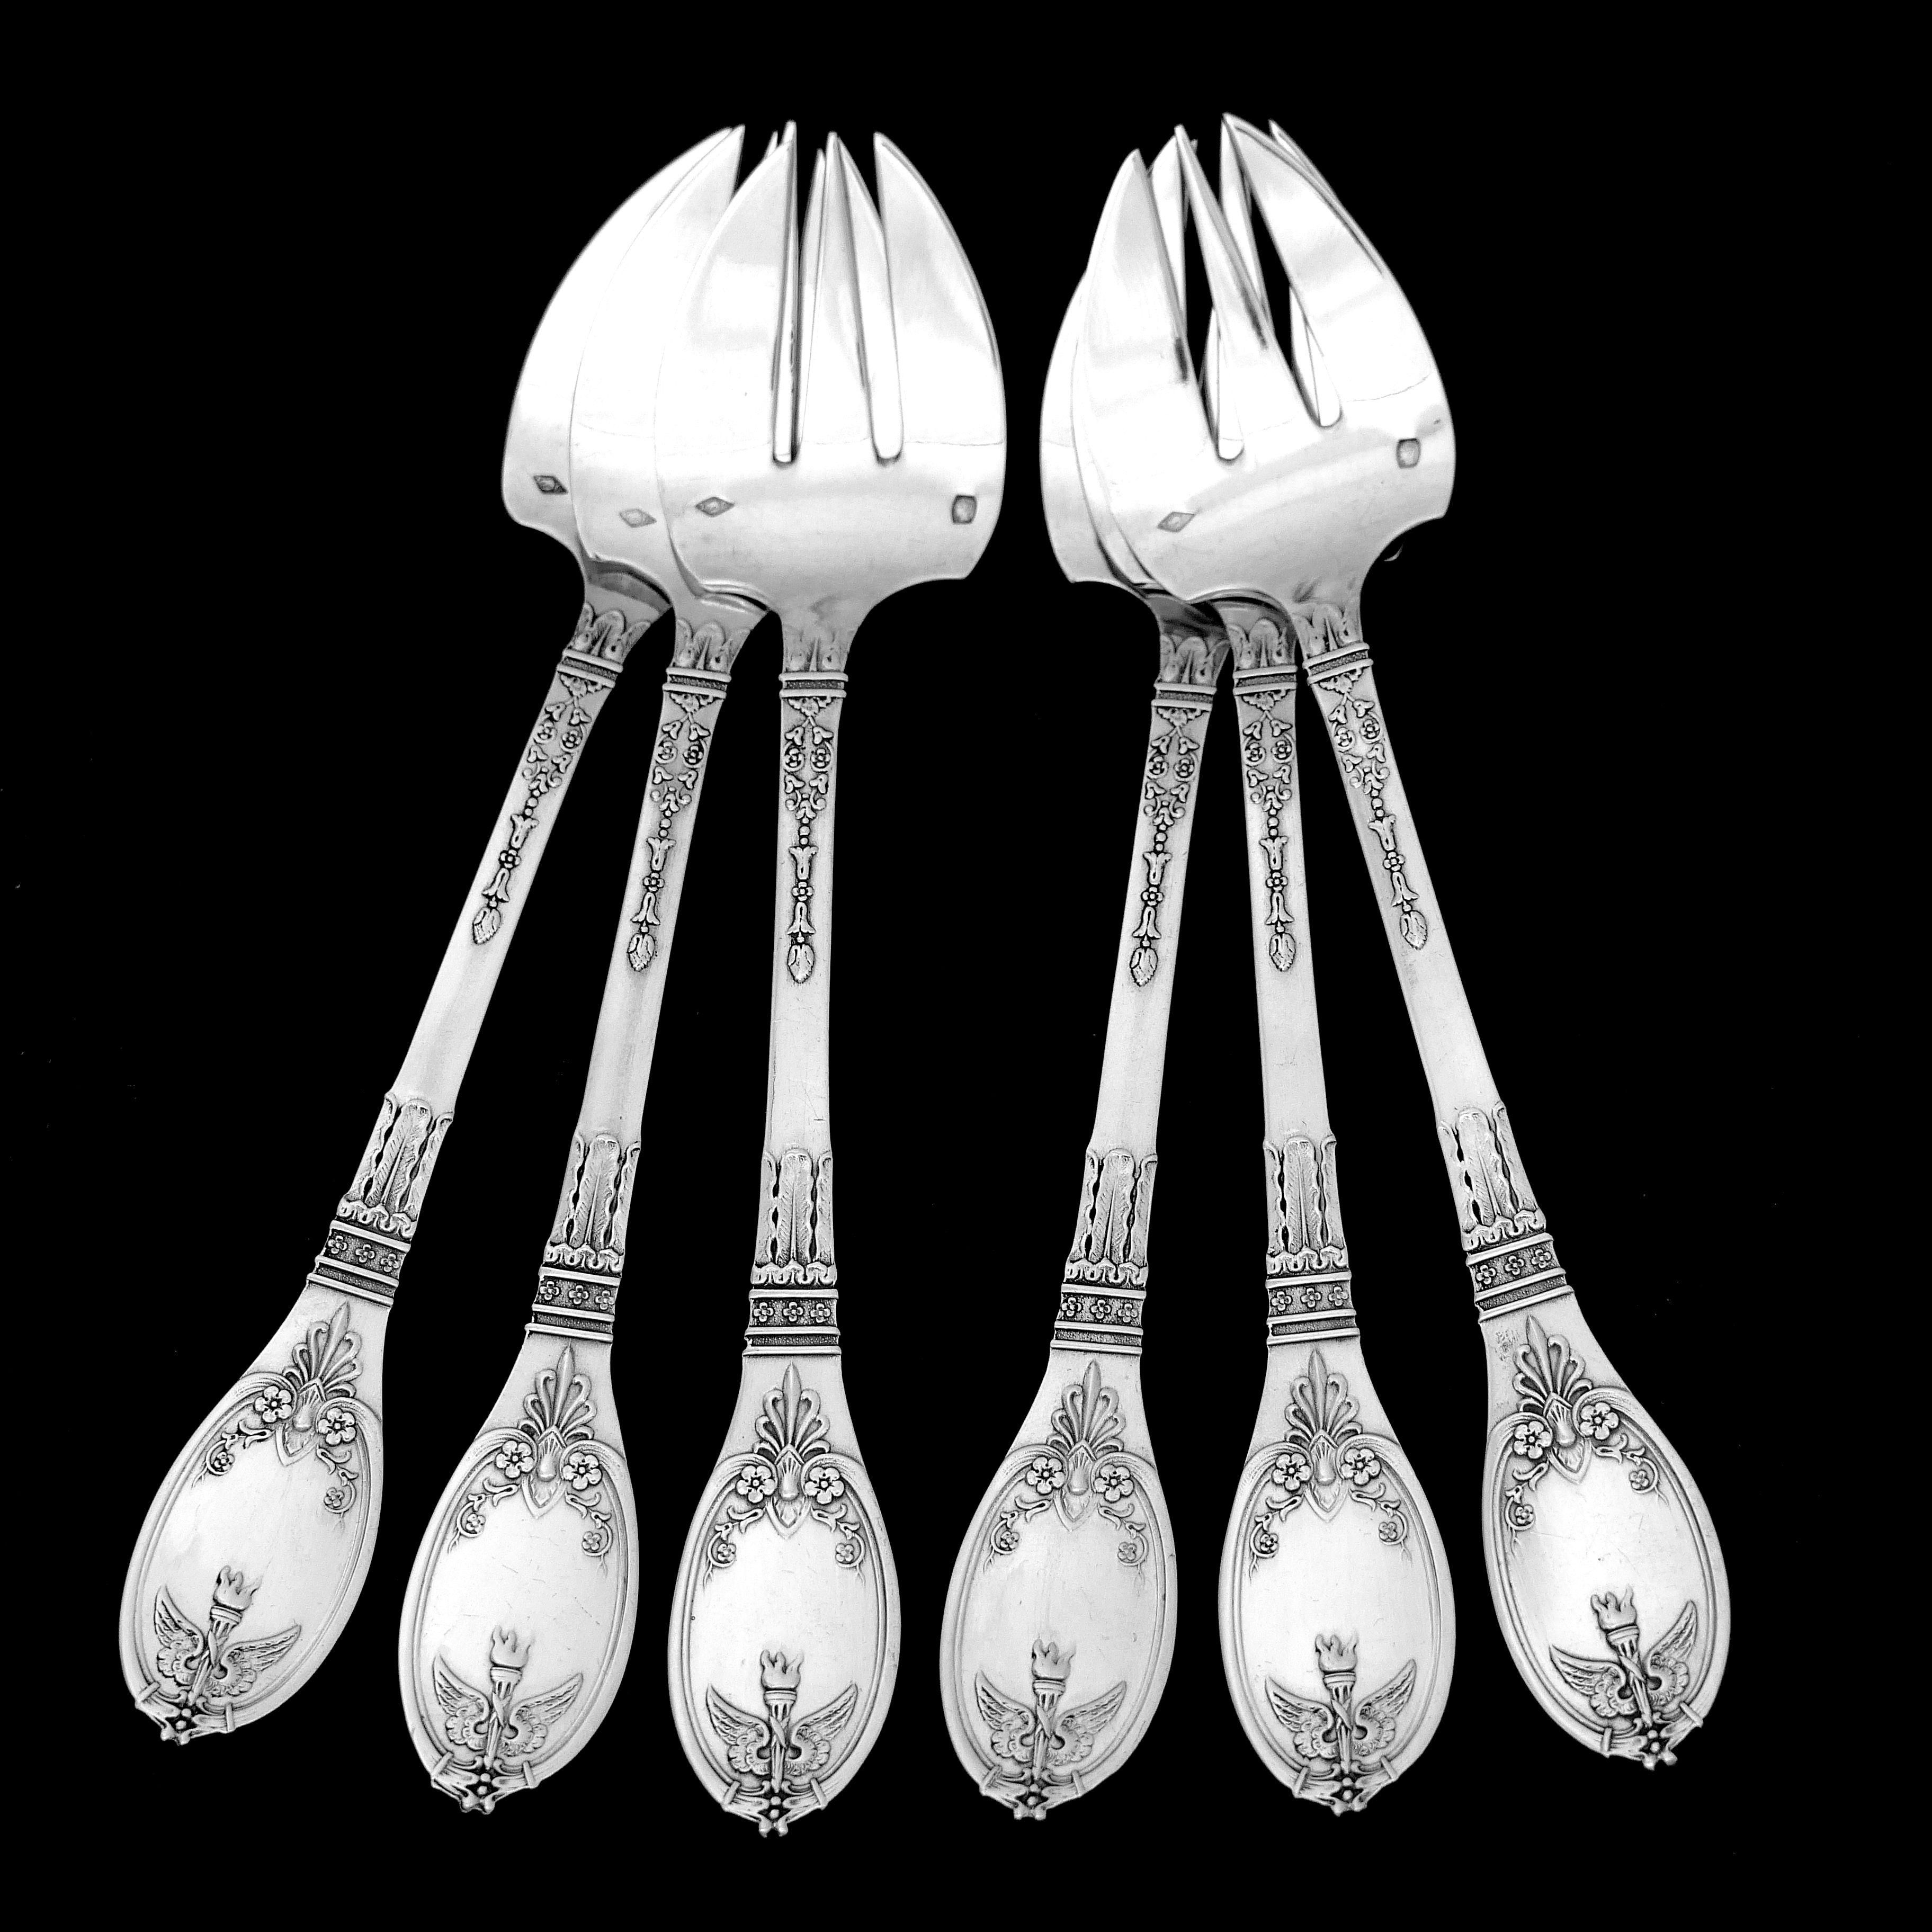 Lapparra Fabulous French Sterling Silver Oyster Forks Set 6 Pc, Empire Torch For Sale 1